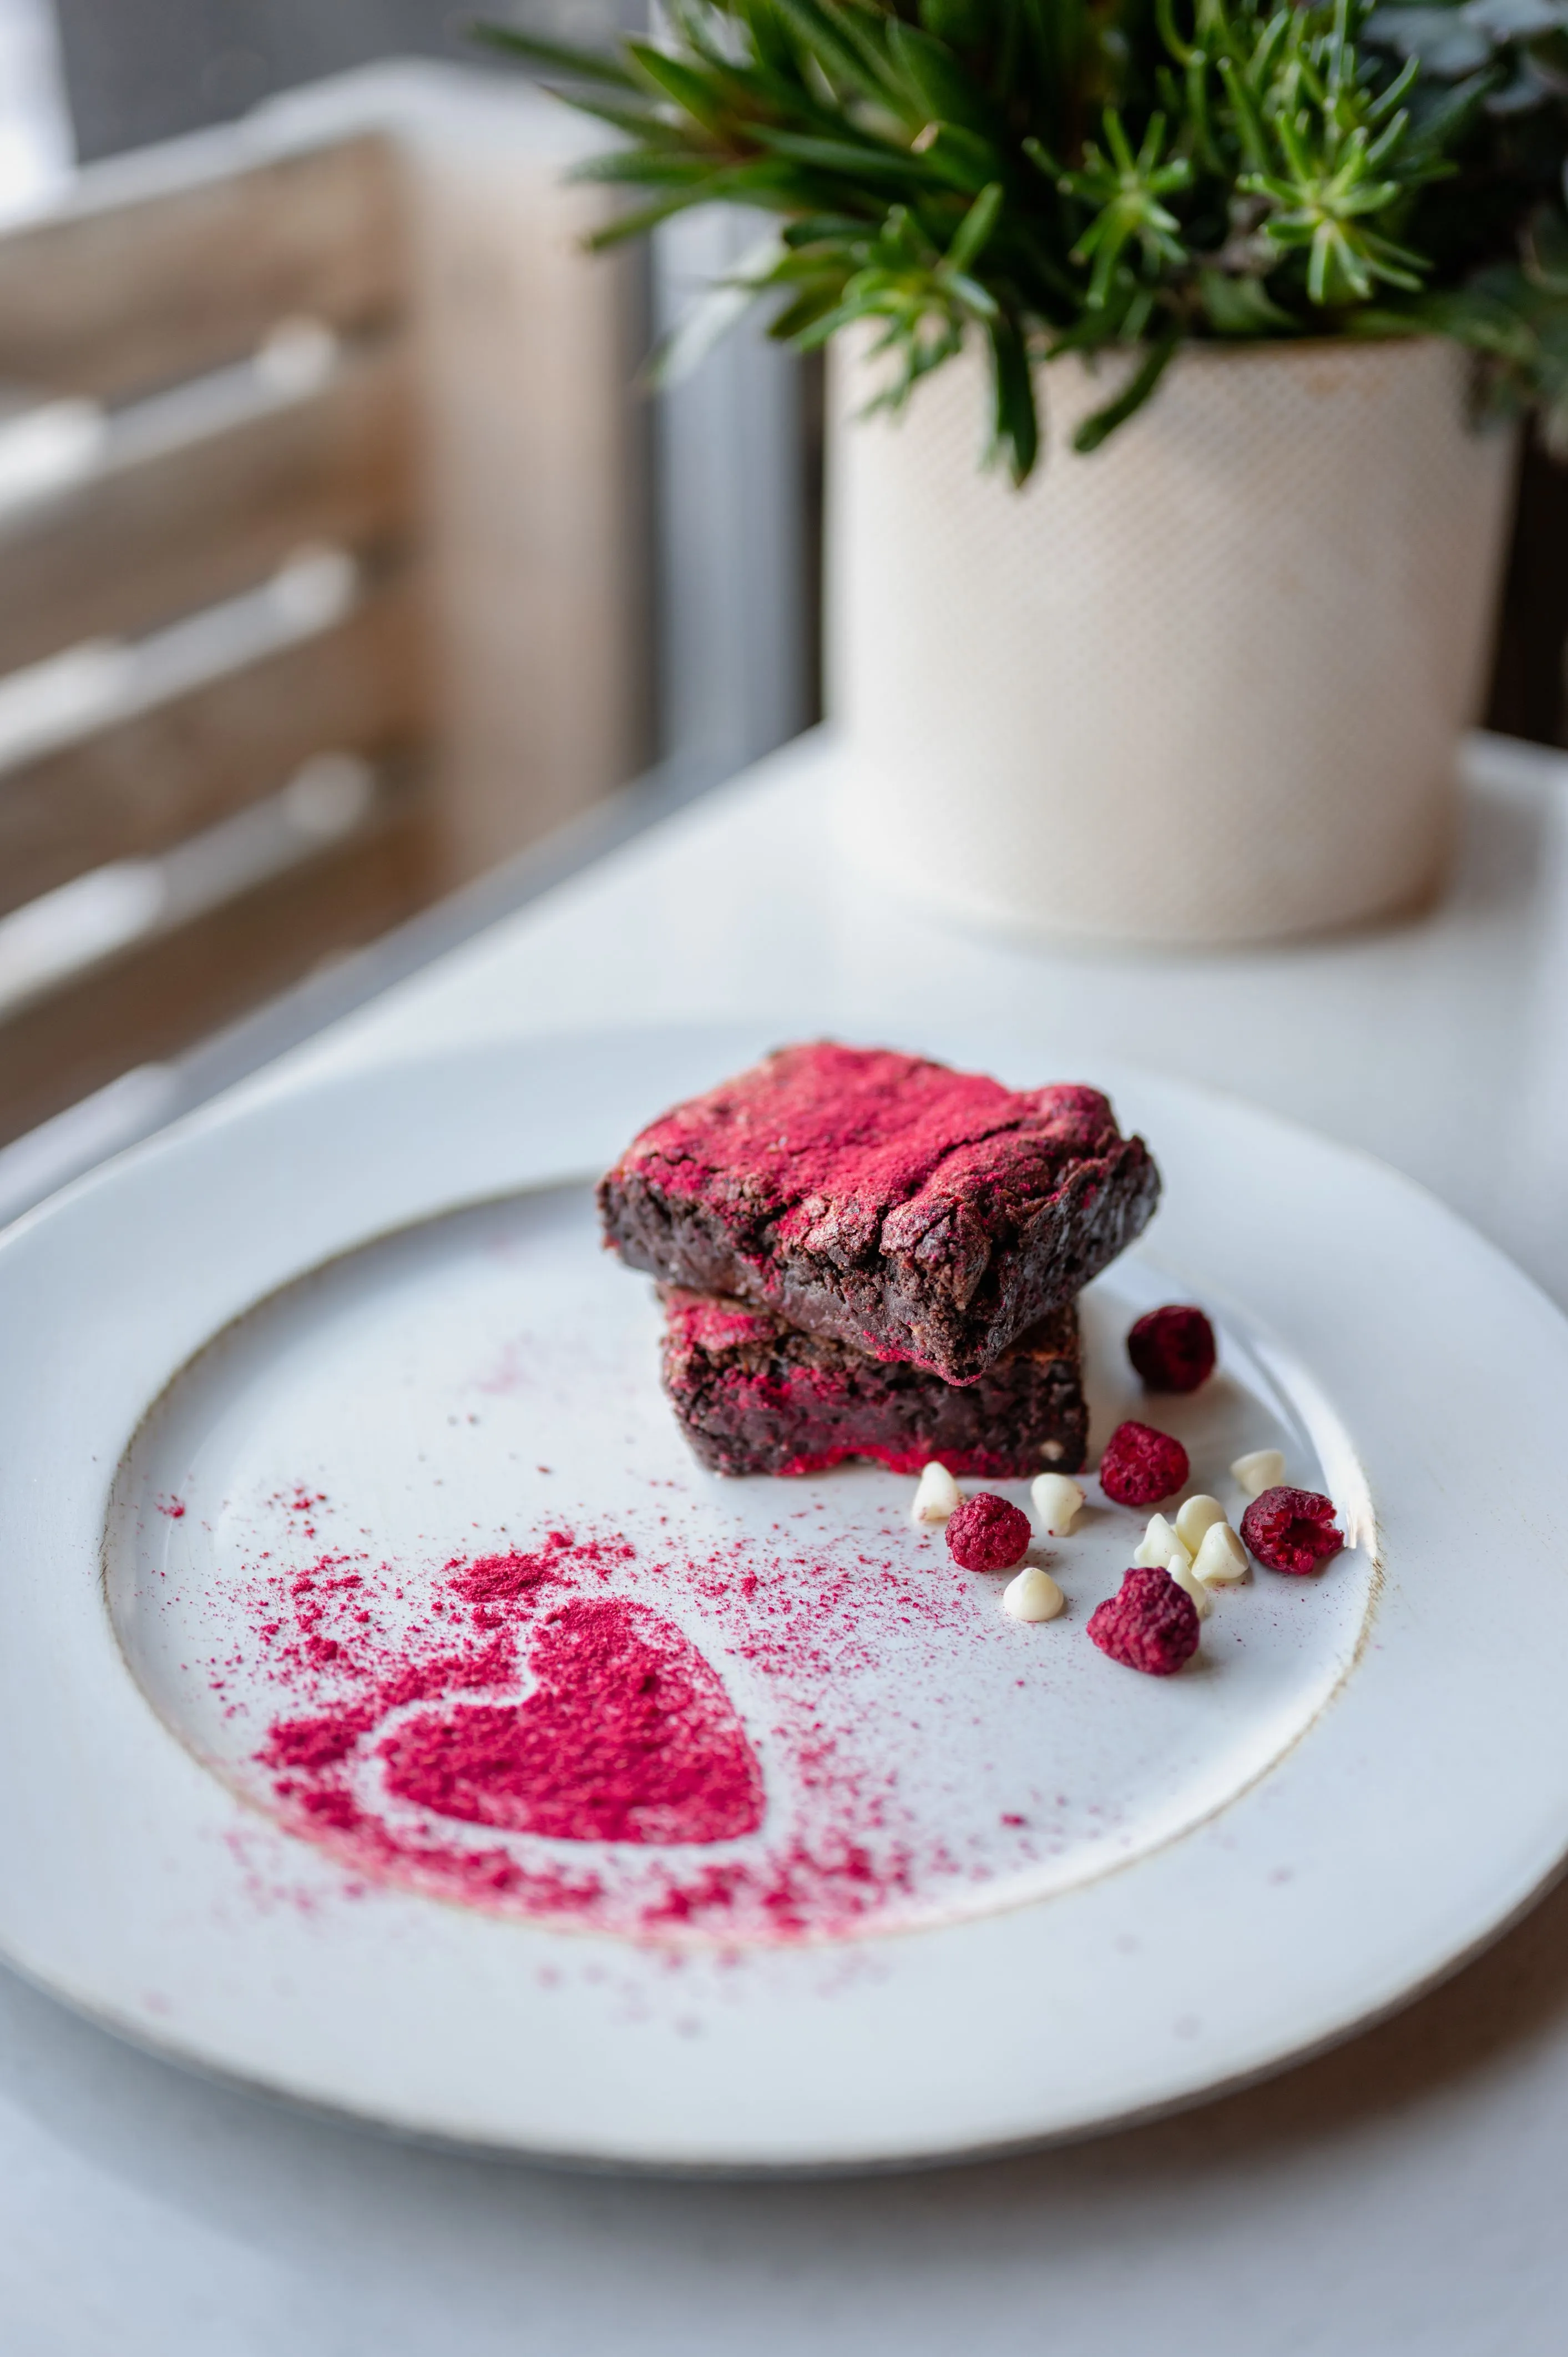 Gourmet presentation of a raspberry brownie on a white plate with freeze-dried raspberry powder shaped as a heart and scattered berries.